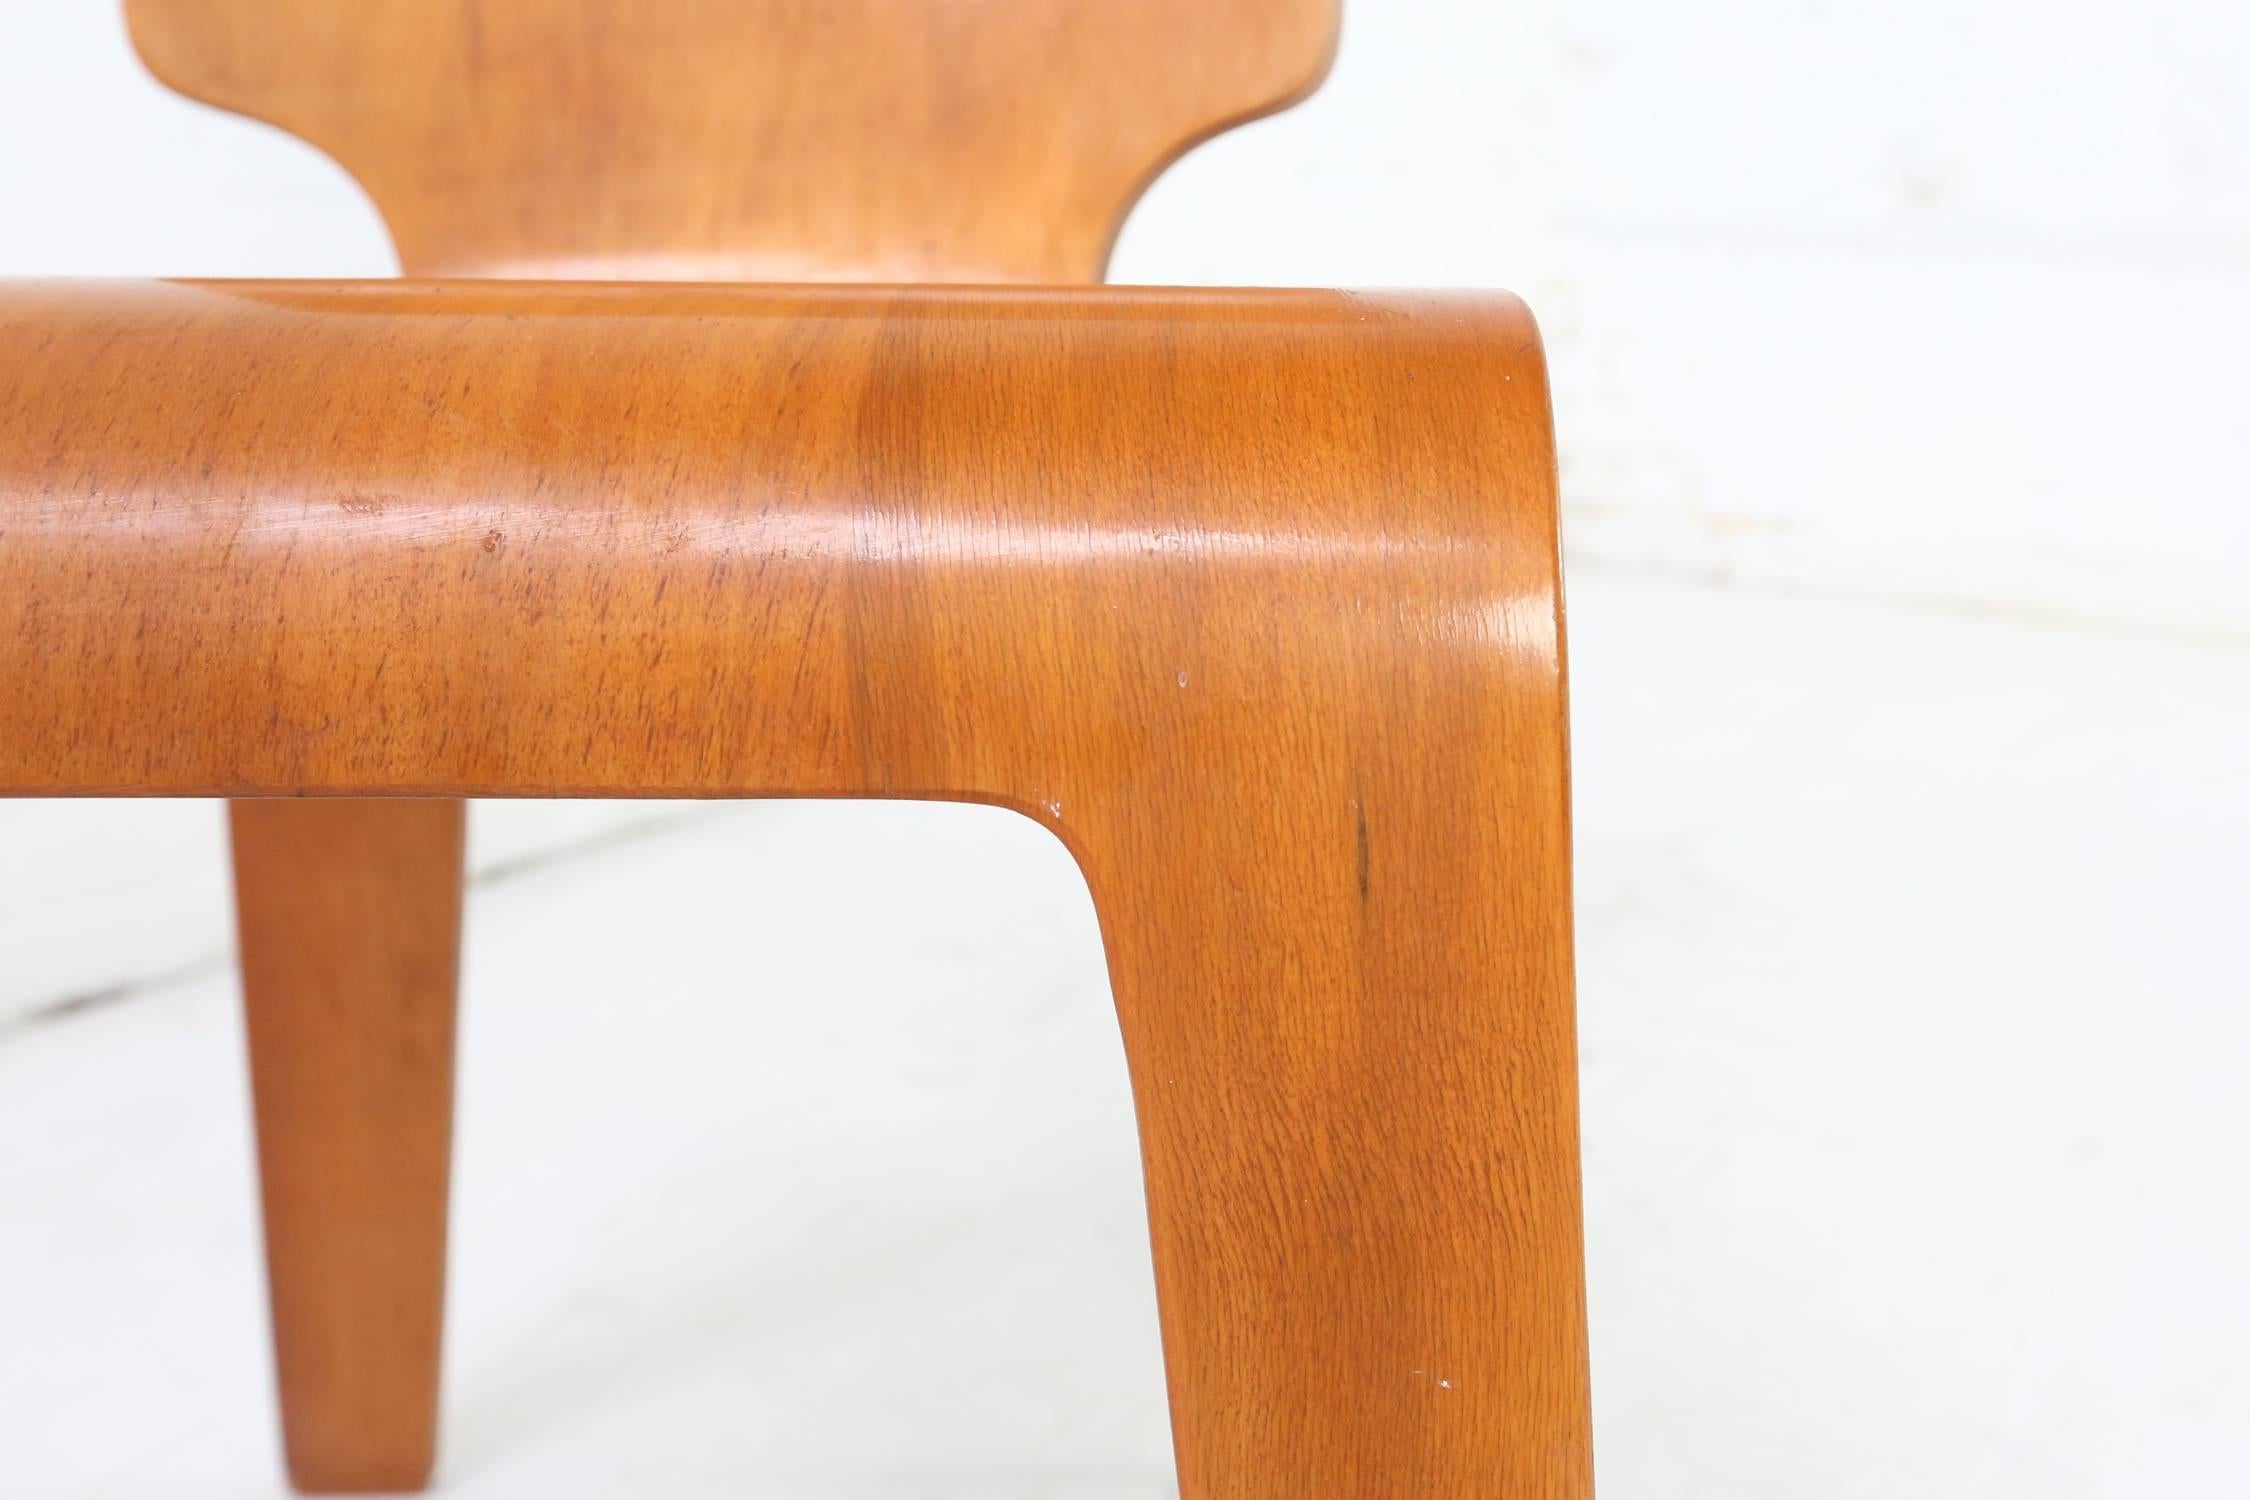 Mid-20th Century Bent Plywood Side Chair by Thaden-Jordan Furniture, 1940s / Han Pieck Style